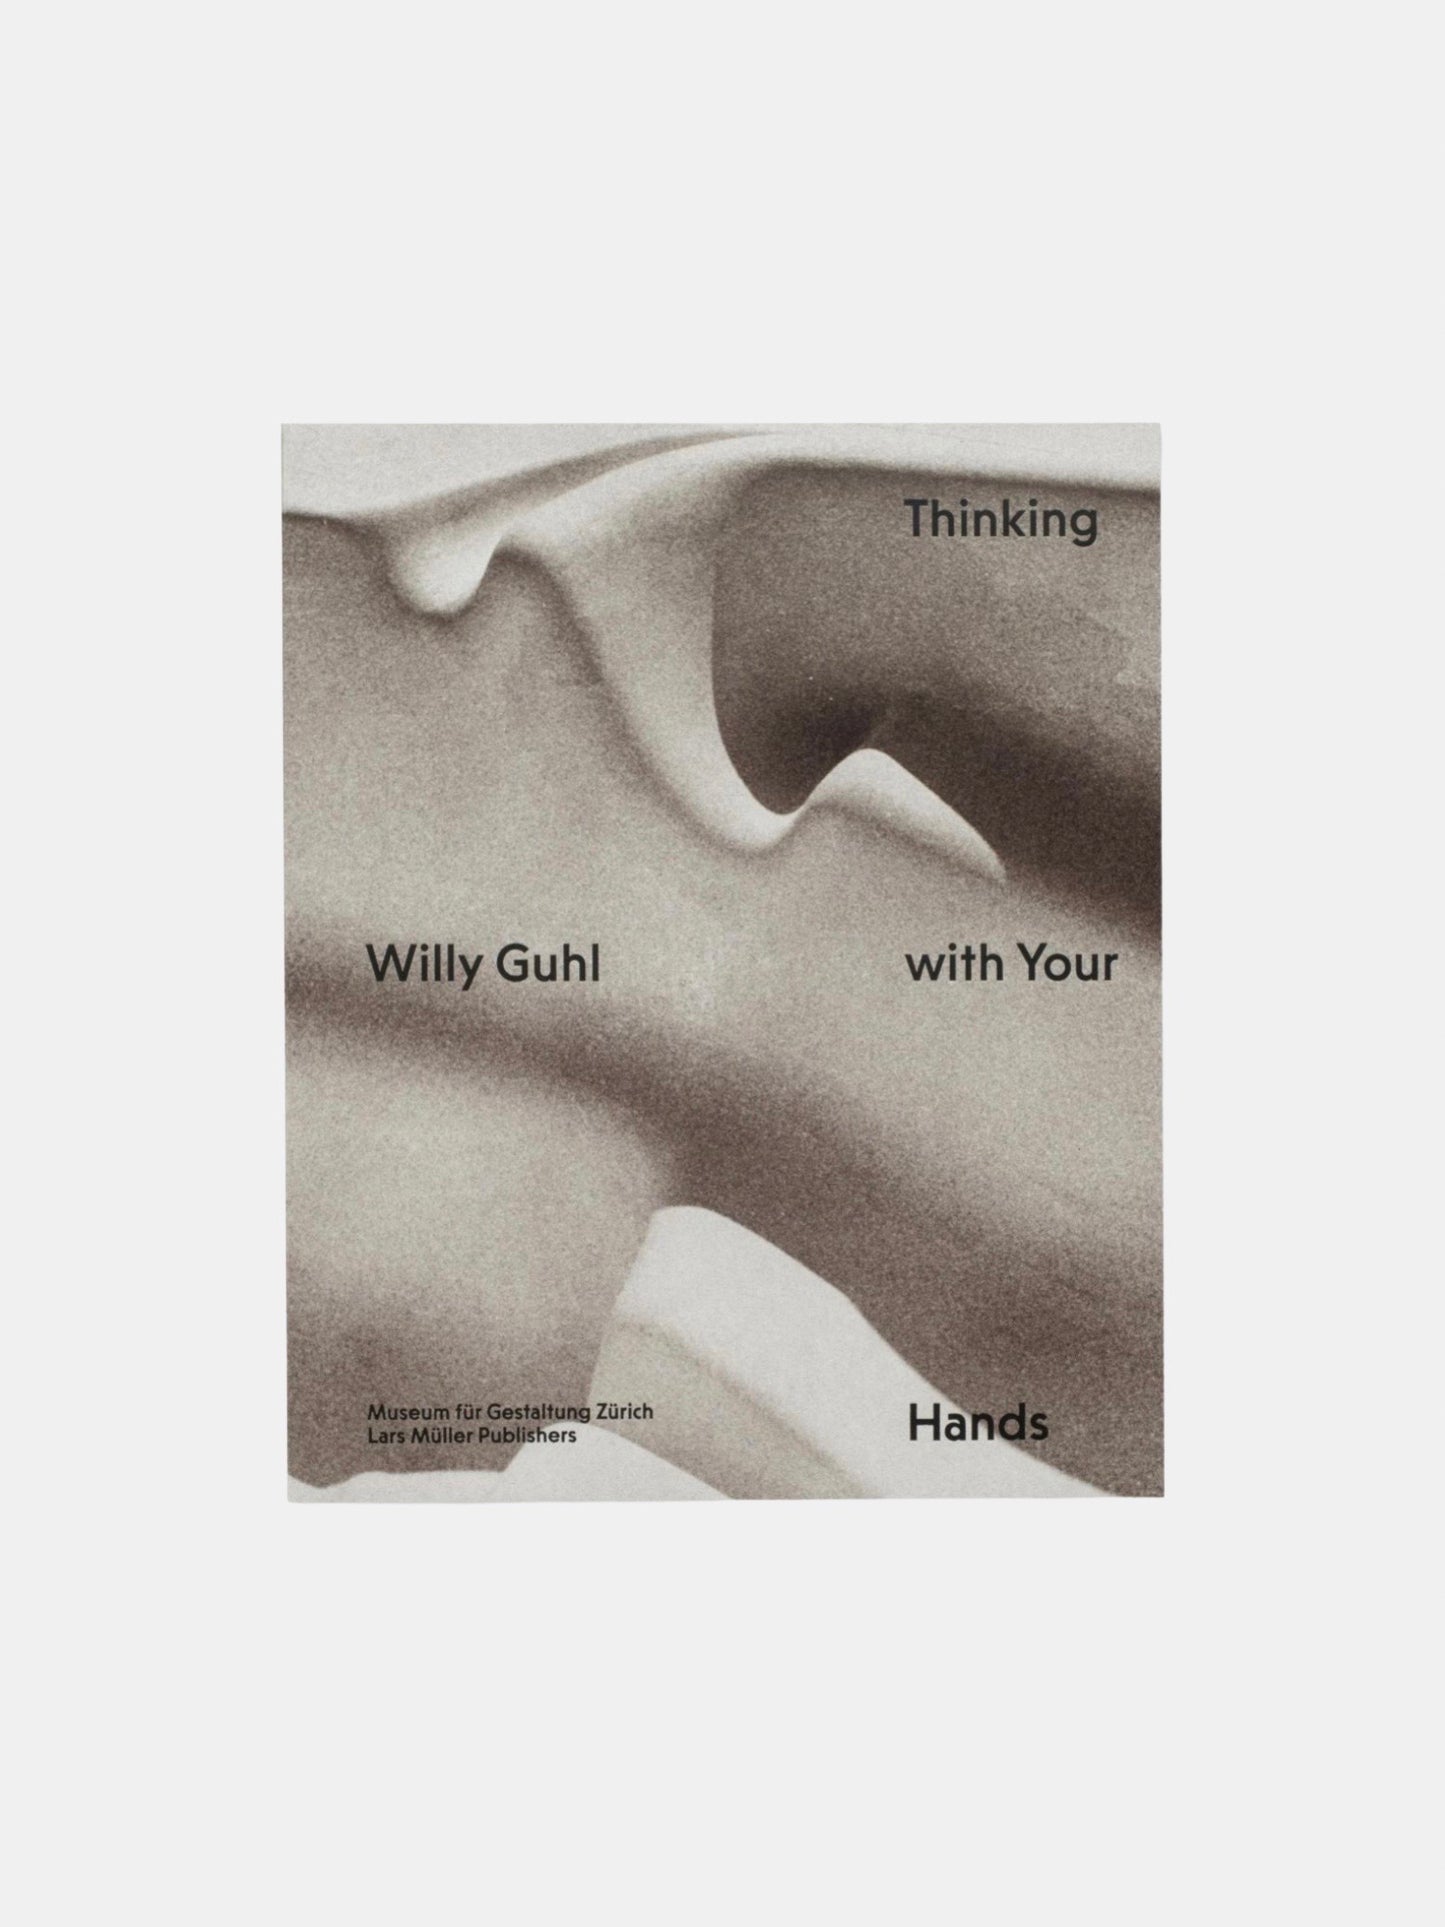 Willy Guhl: Thinking With Your Hands